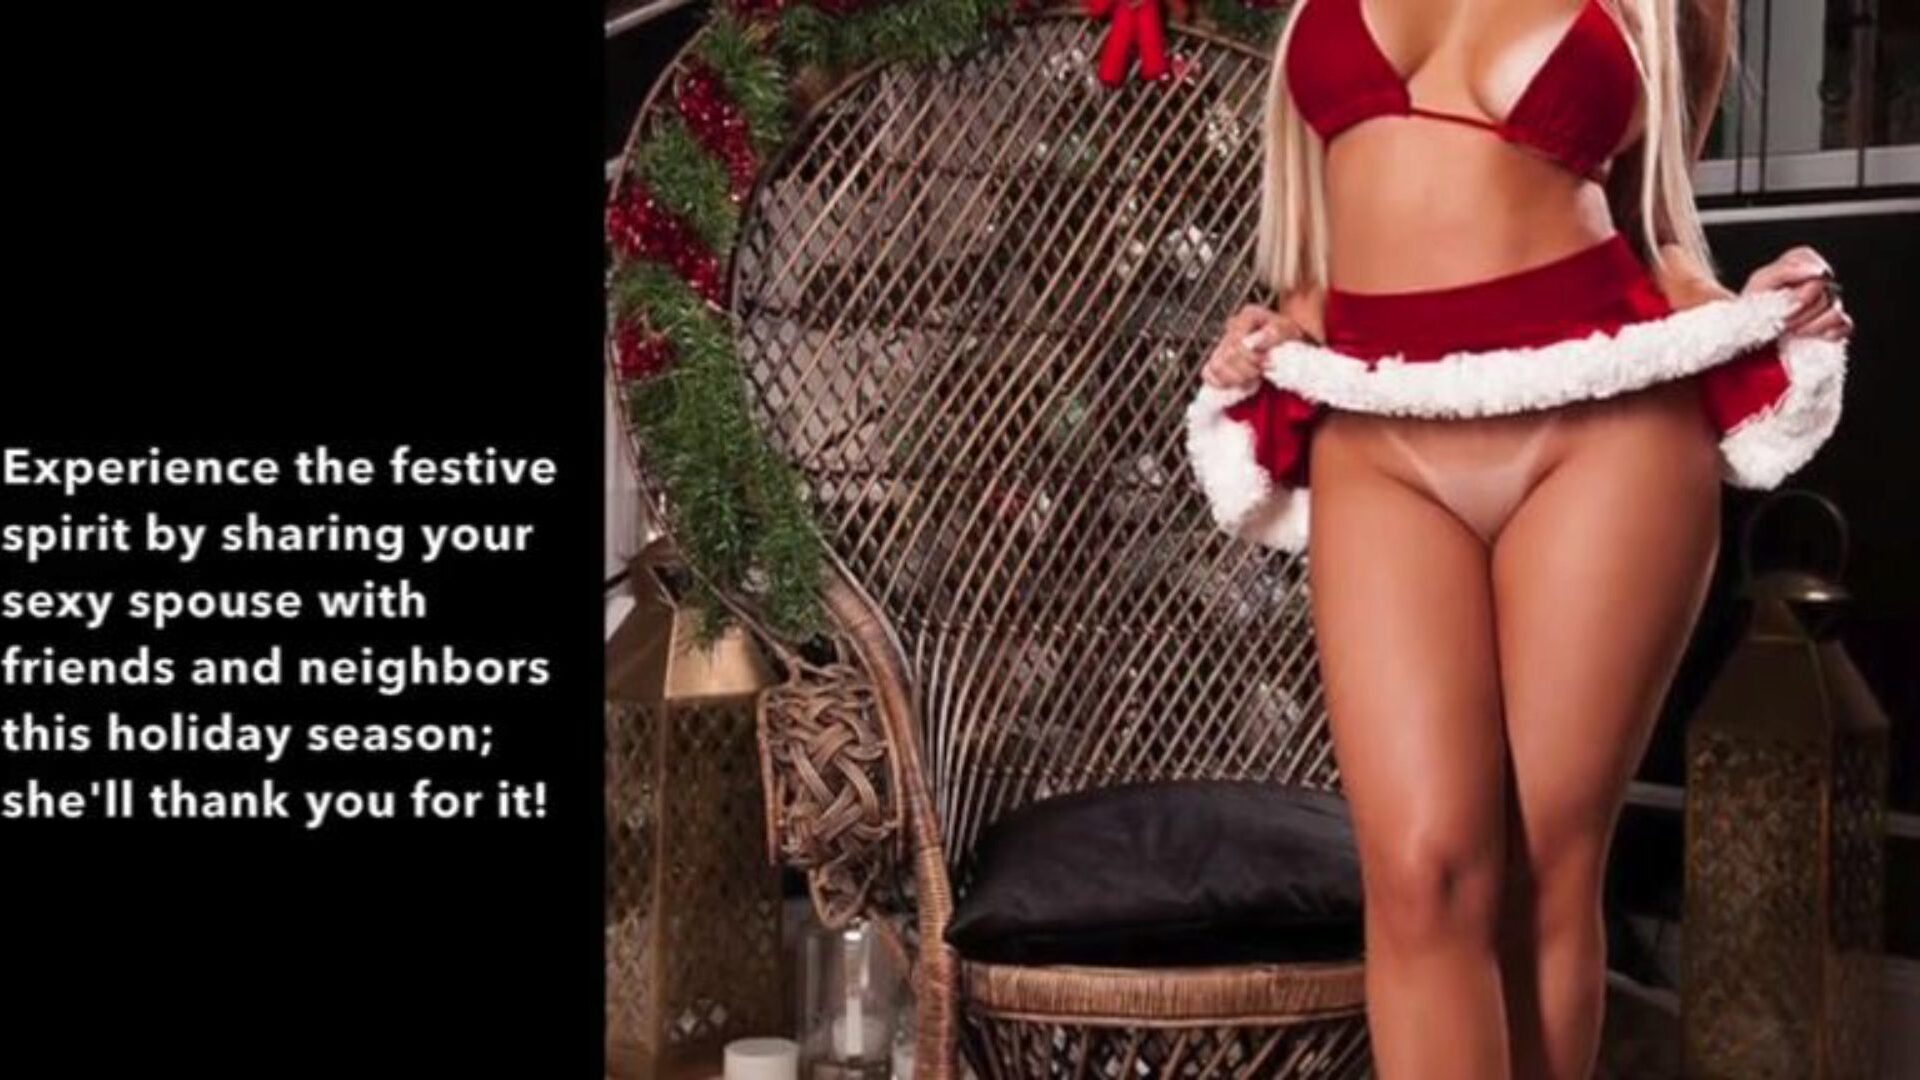 Perky Christmas 2019 wife sharing for the Xmas holidays) This holiday season give the almost any valuable gift of all... your wife  (Hotwife, cuckold story, captions, bbc observing your wife have climaxes and fucky-fucky with other dudes hallelujah!)